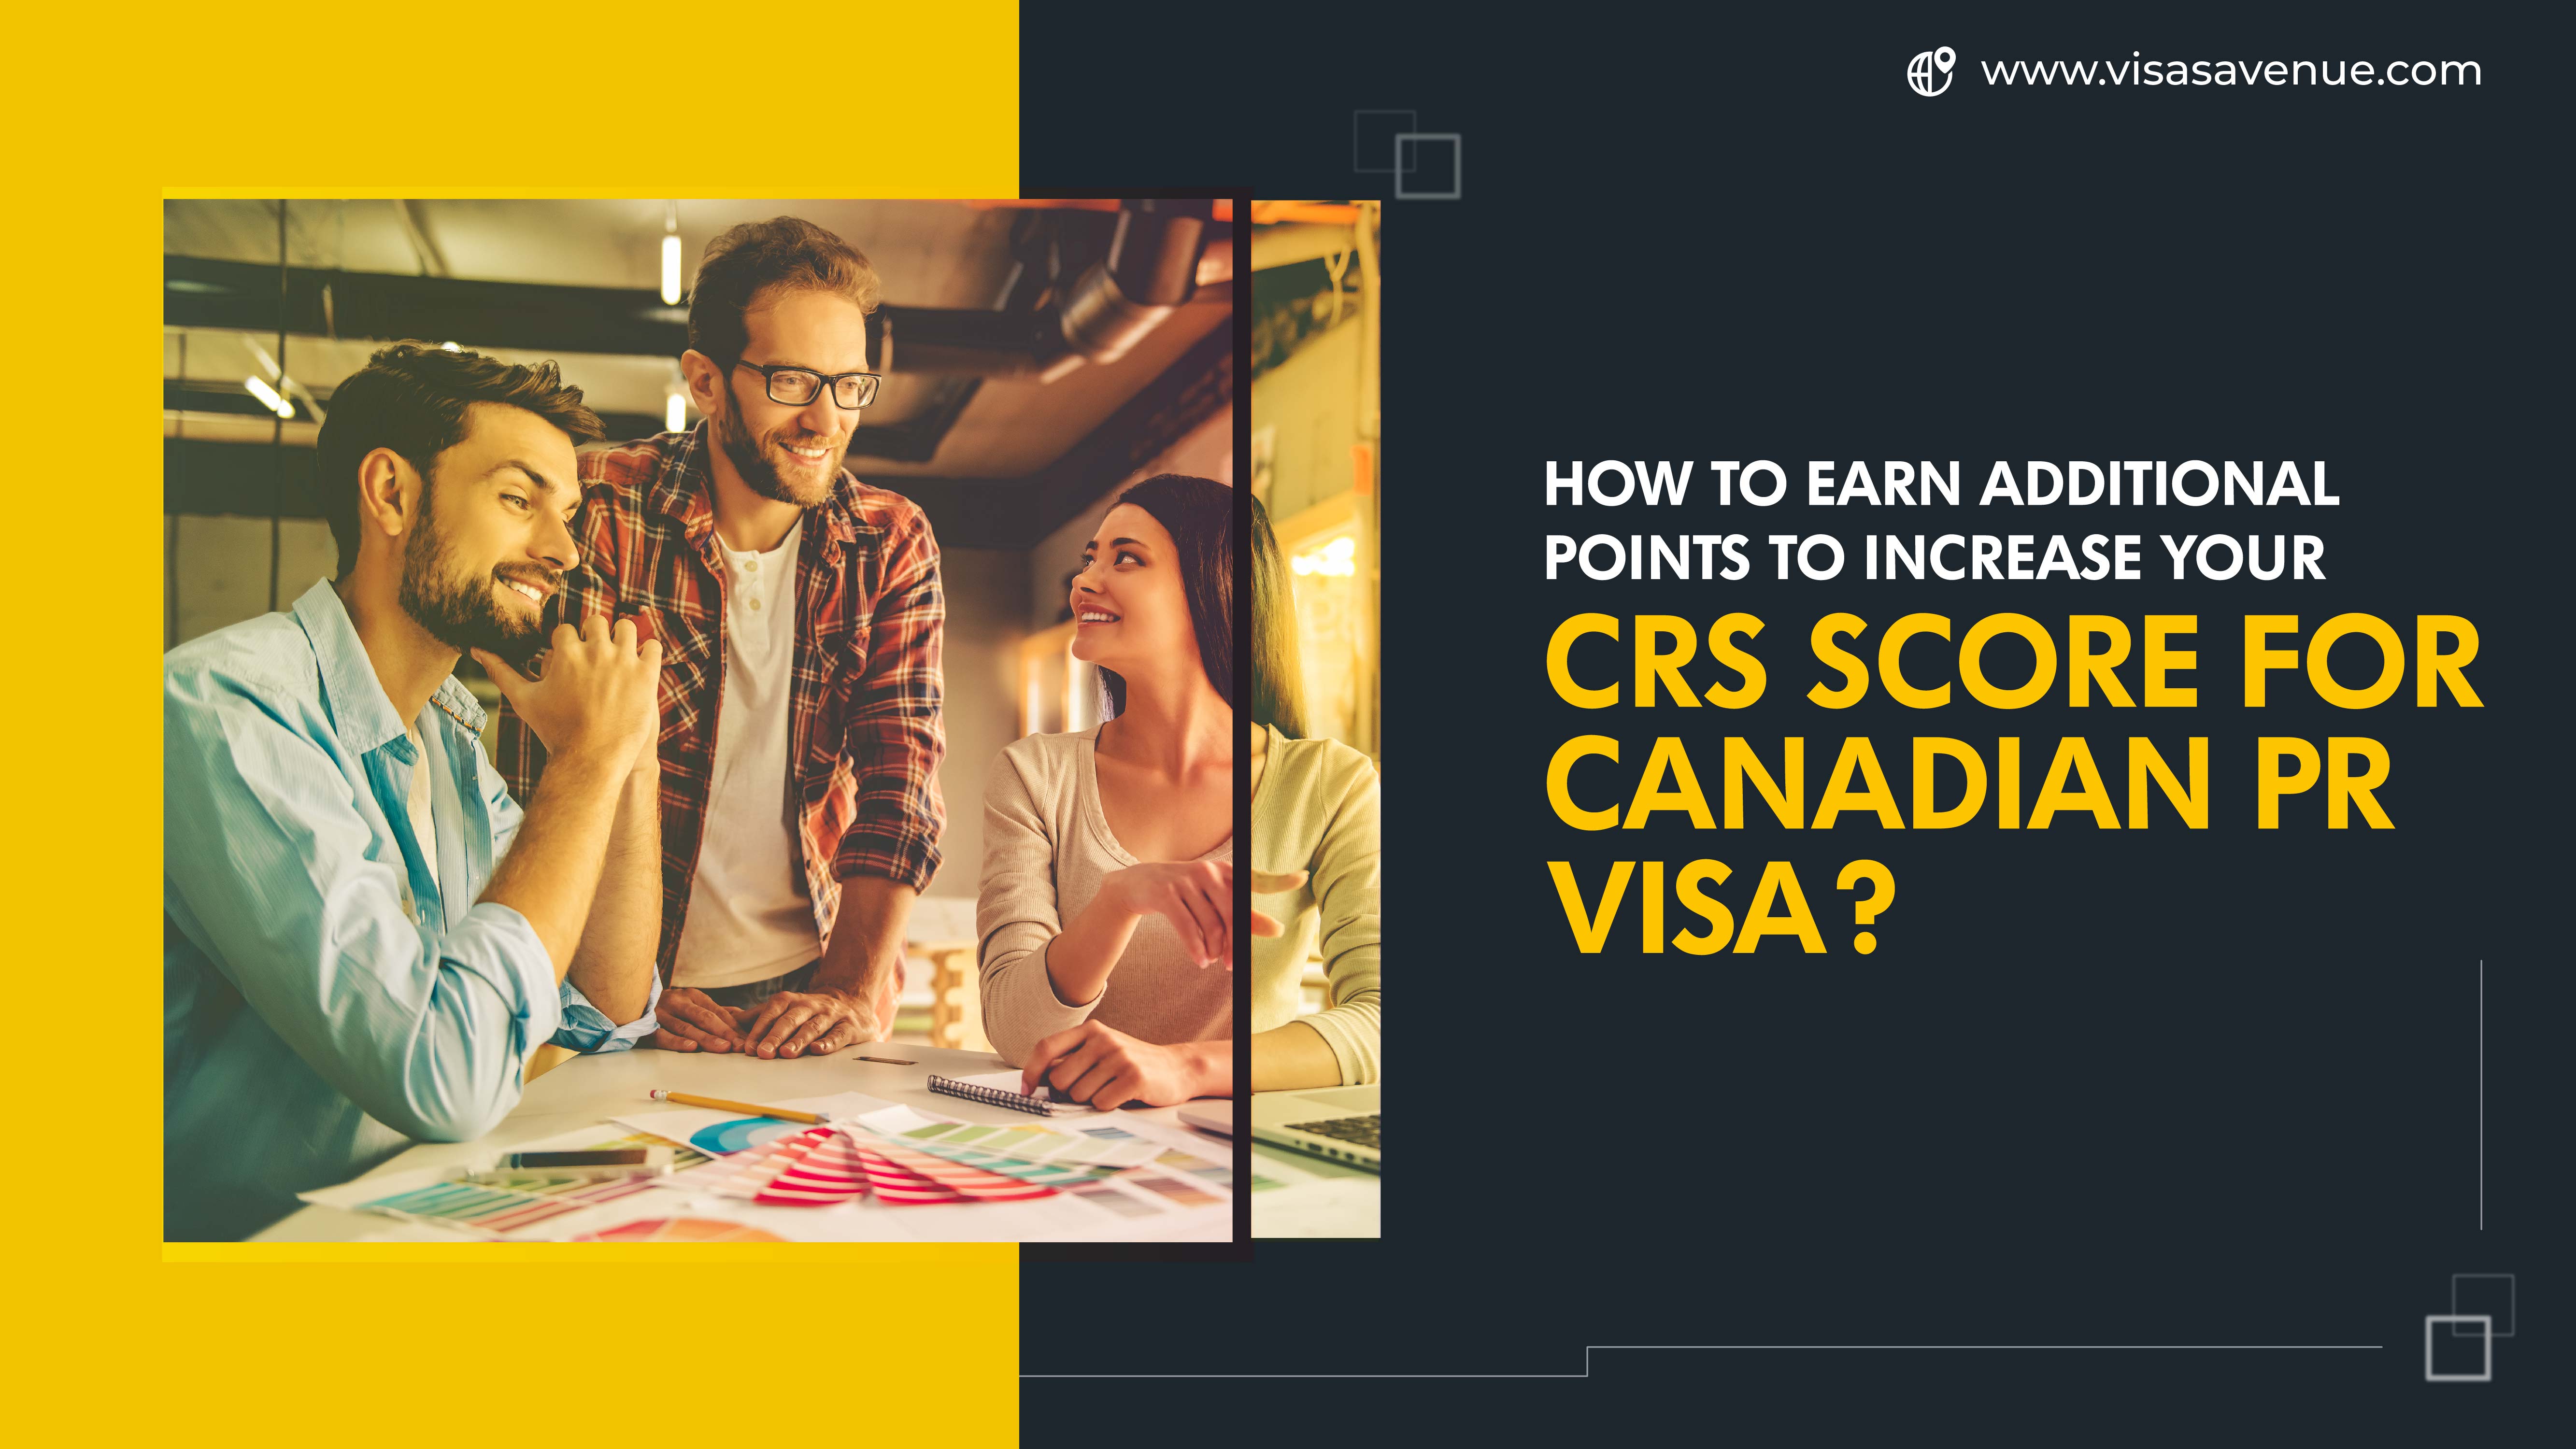 How to Earn Additional points to increase your CRS score for Canadian PR visa?